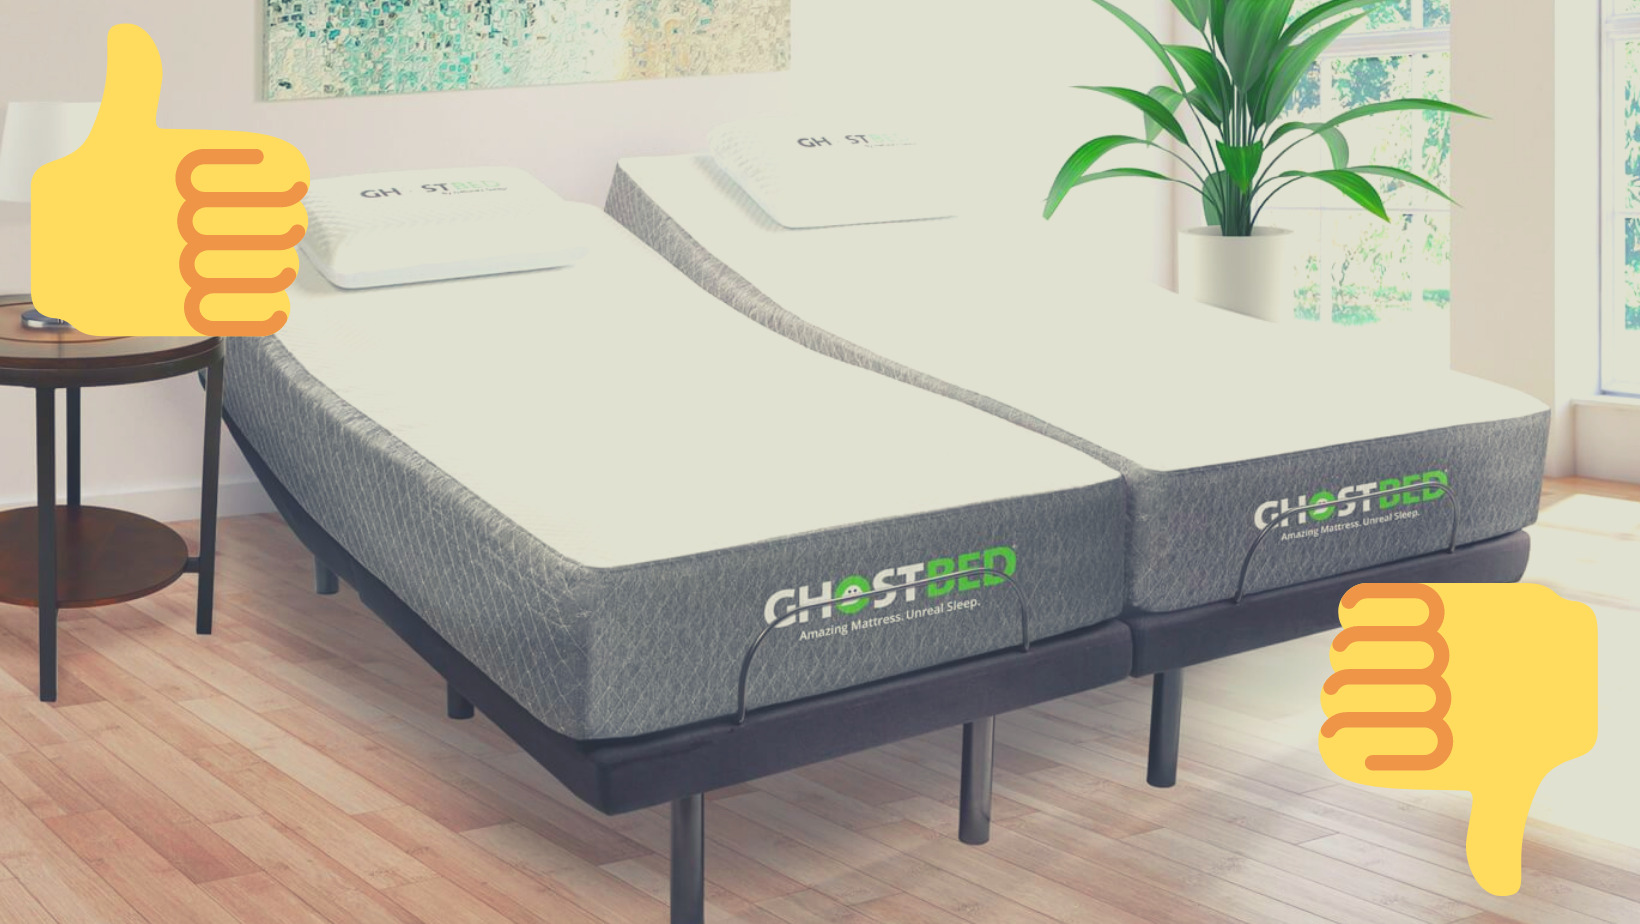 GhostBed Adjustable Base Reviews - Cover Image